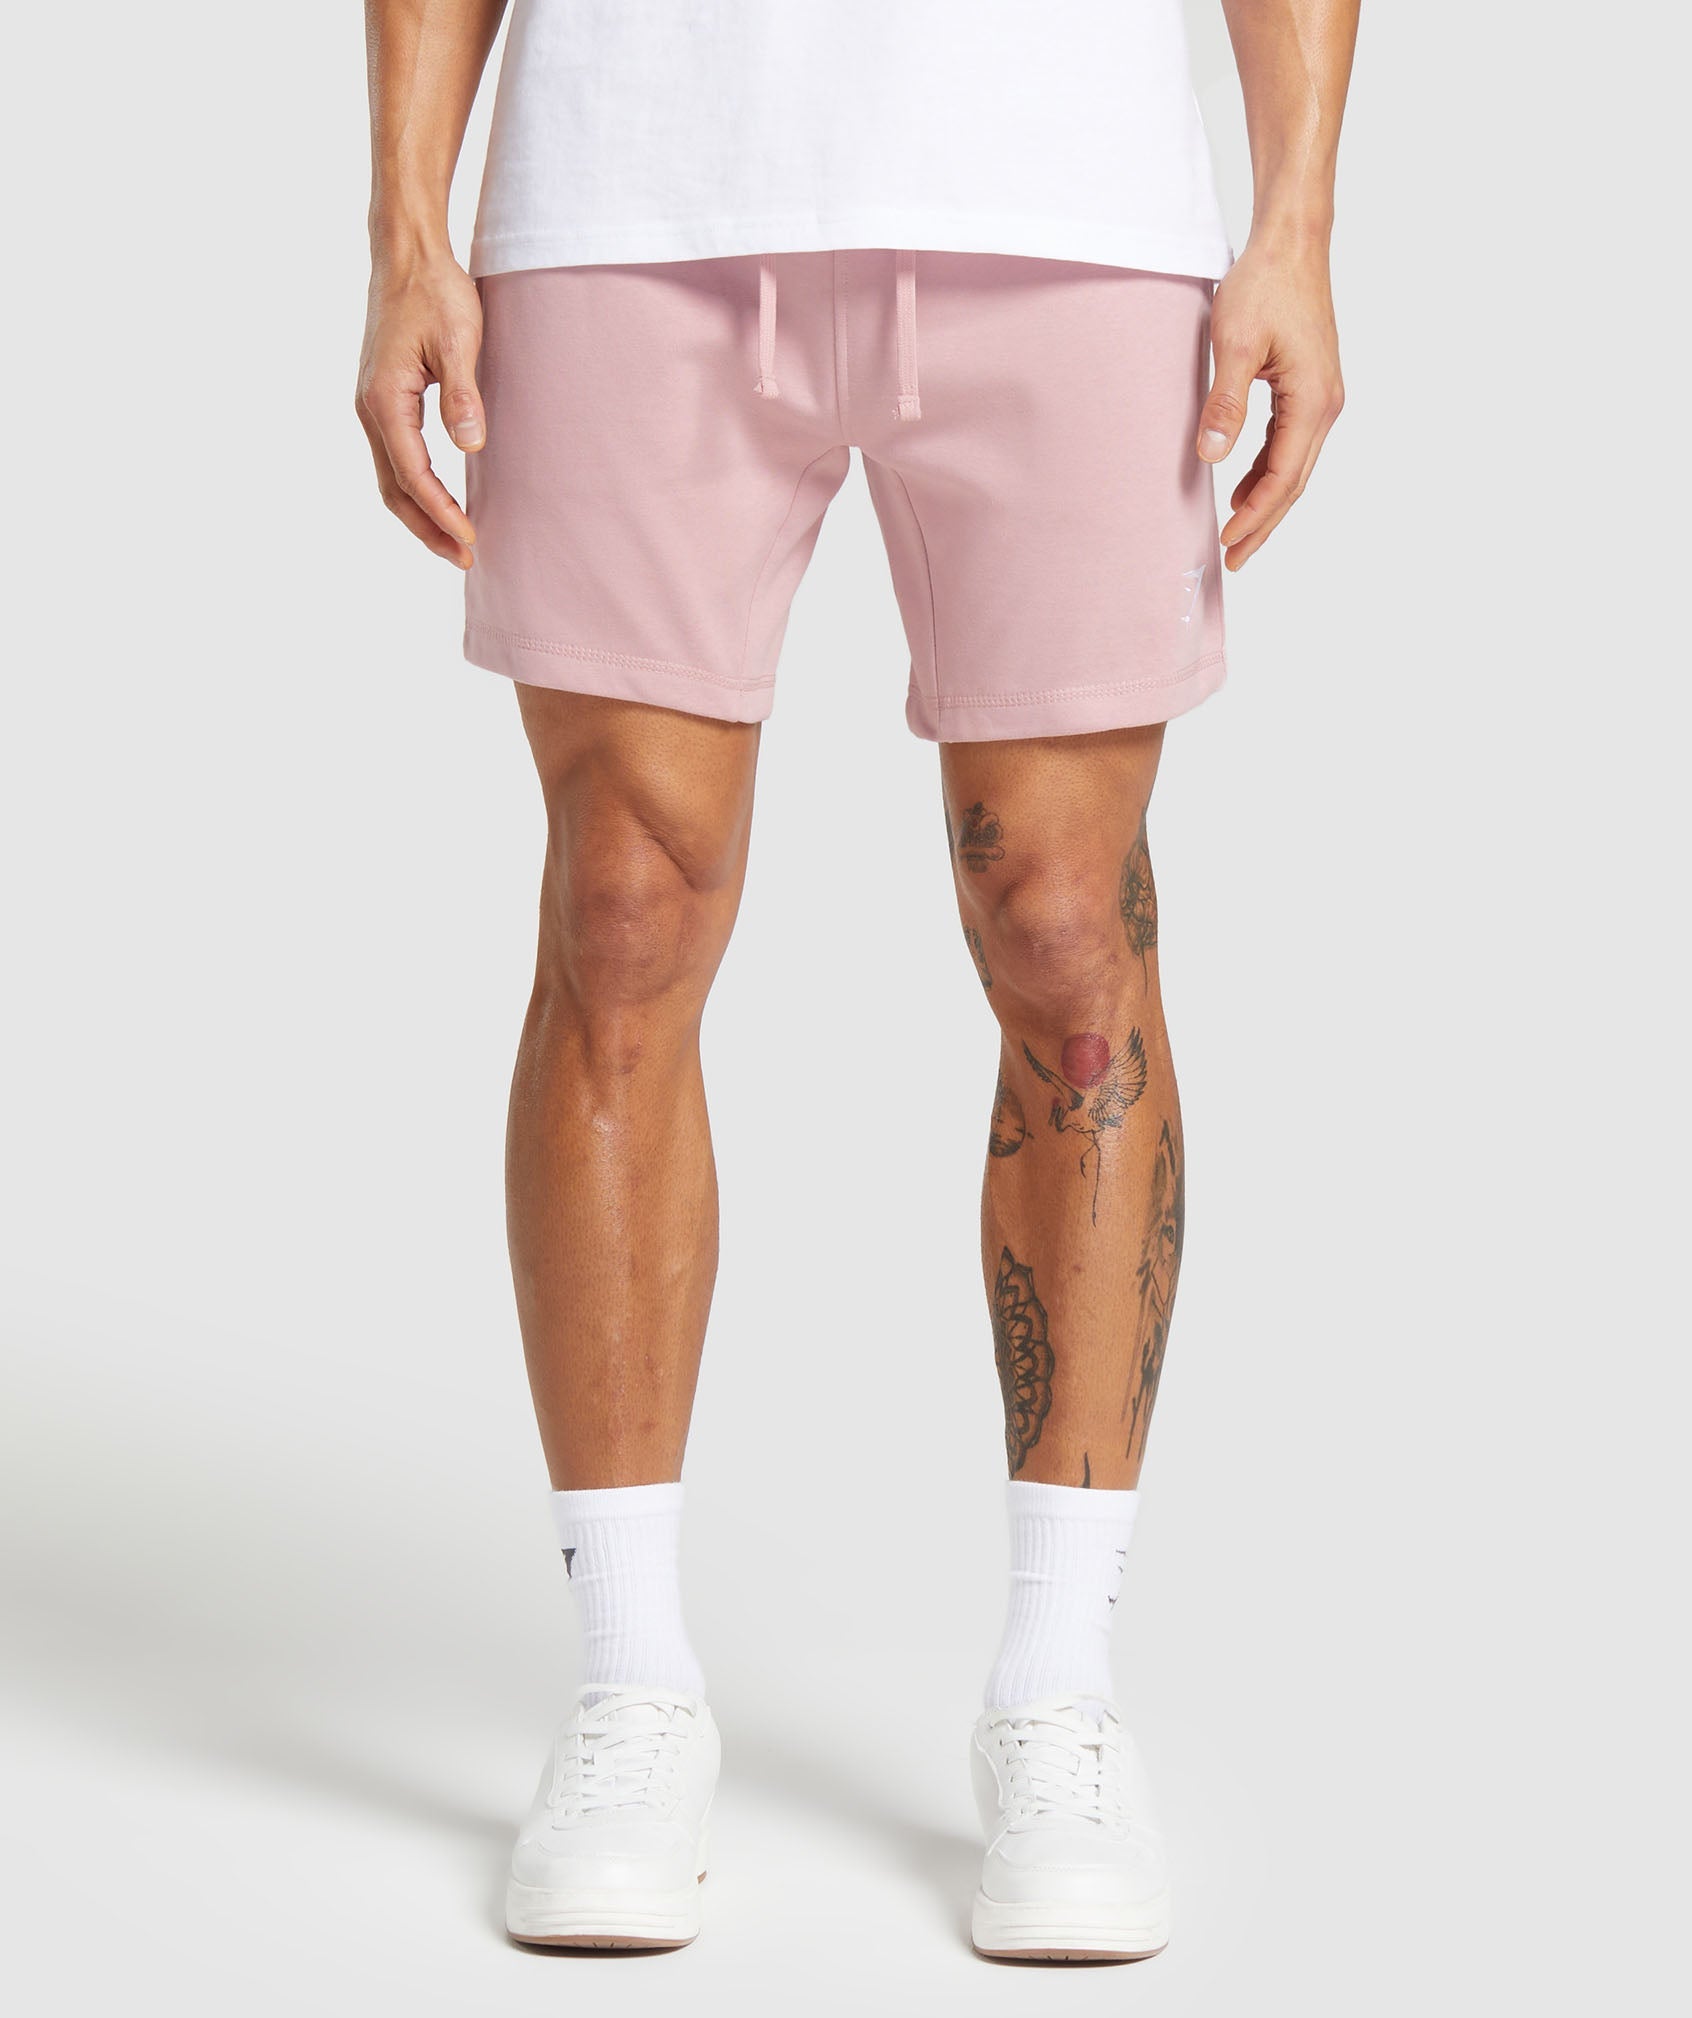 Crest 7" Shorts in Light Pink - view 1